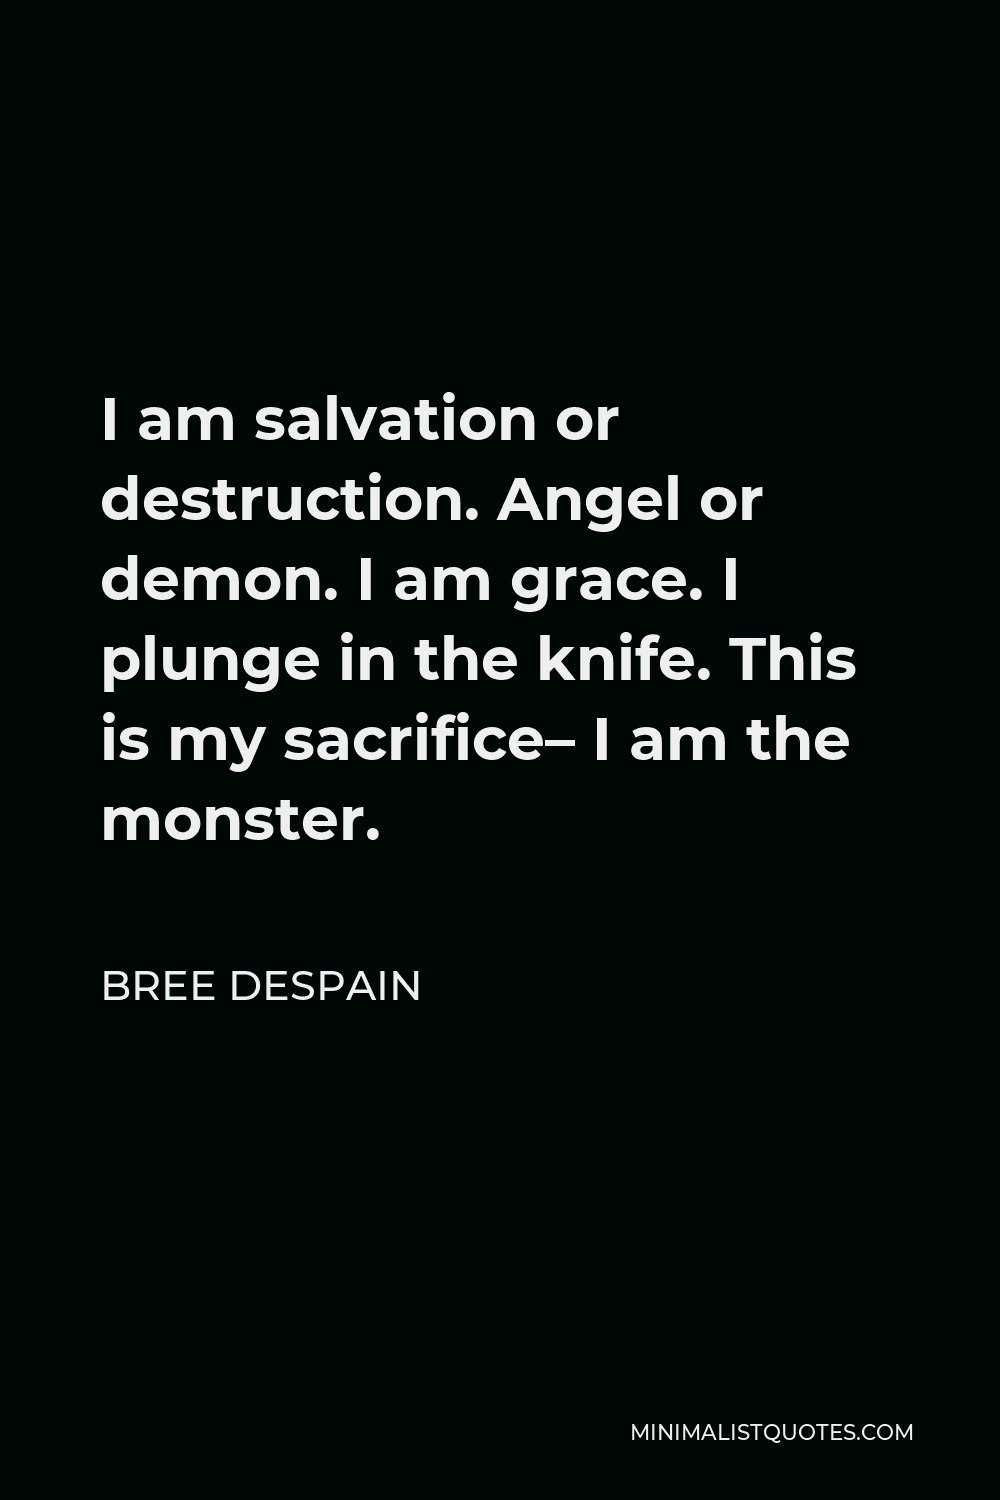 Bree Despain Quote - I am salvation or destruction. Angel or demon. I am grace. I plunge in the knife. This is my sacrifice– I am the monster.